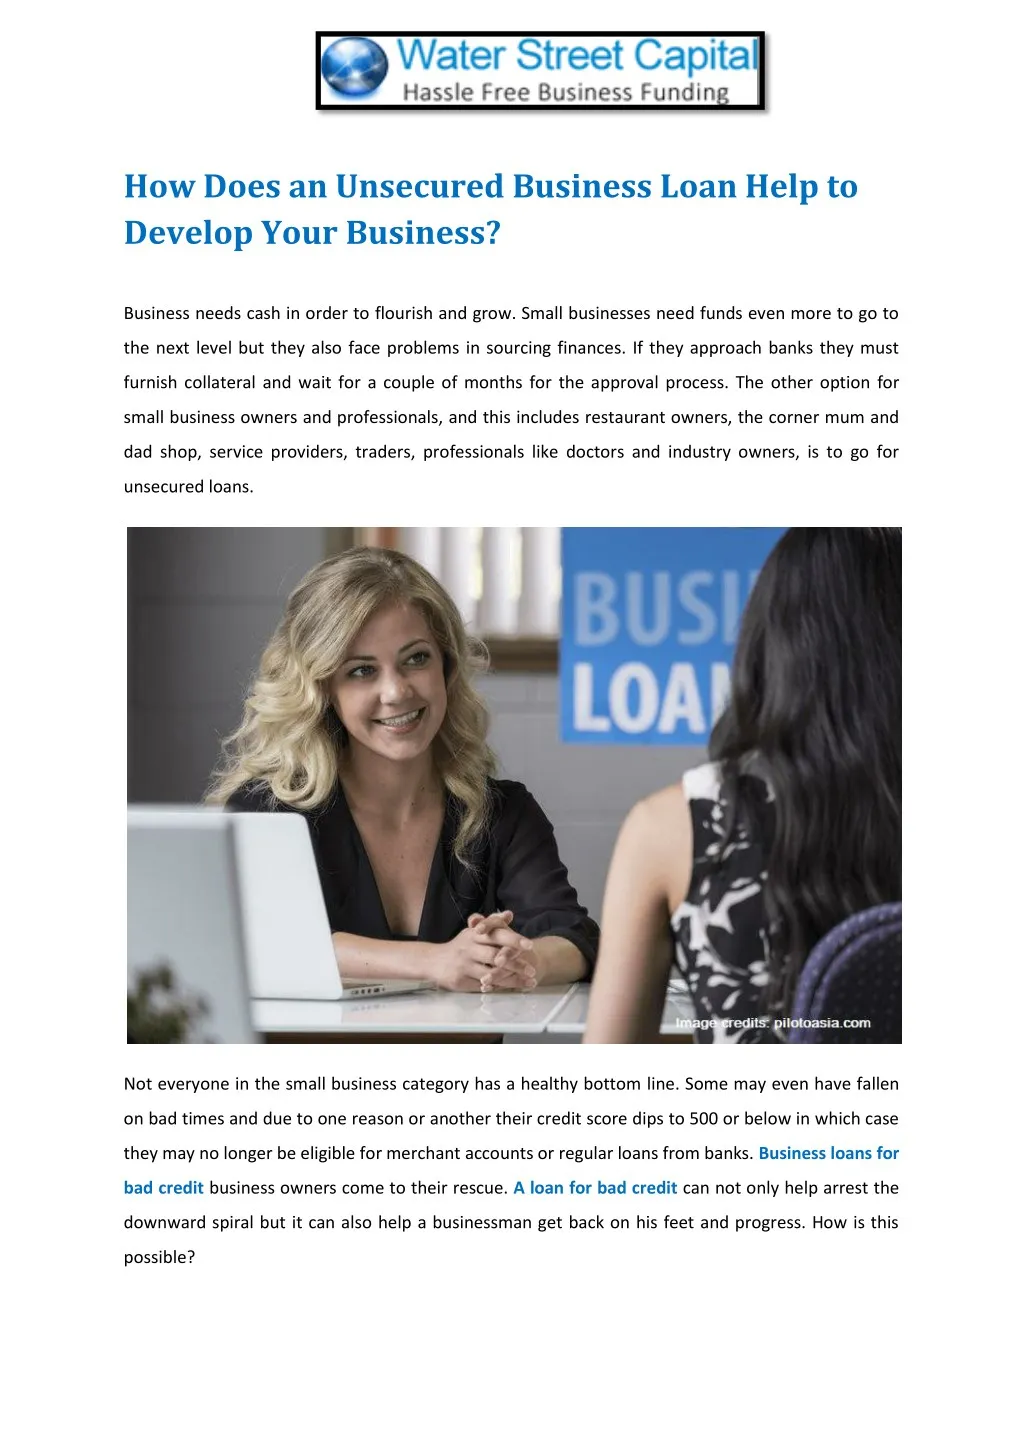 how does an unsecured business loan help